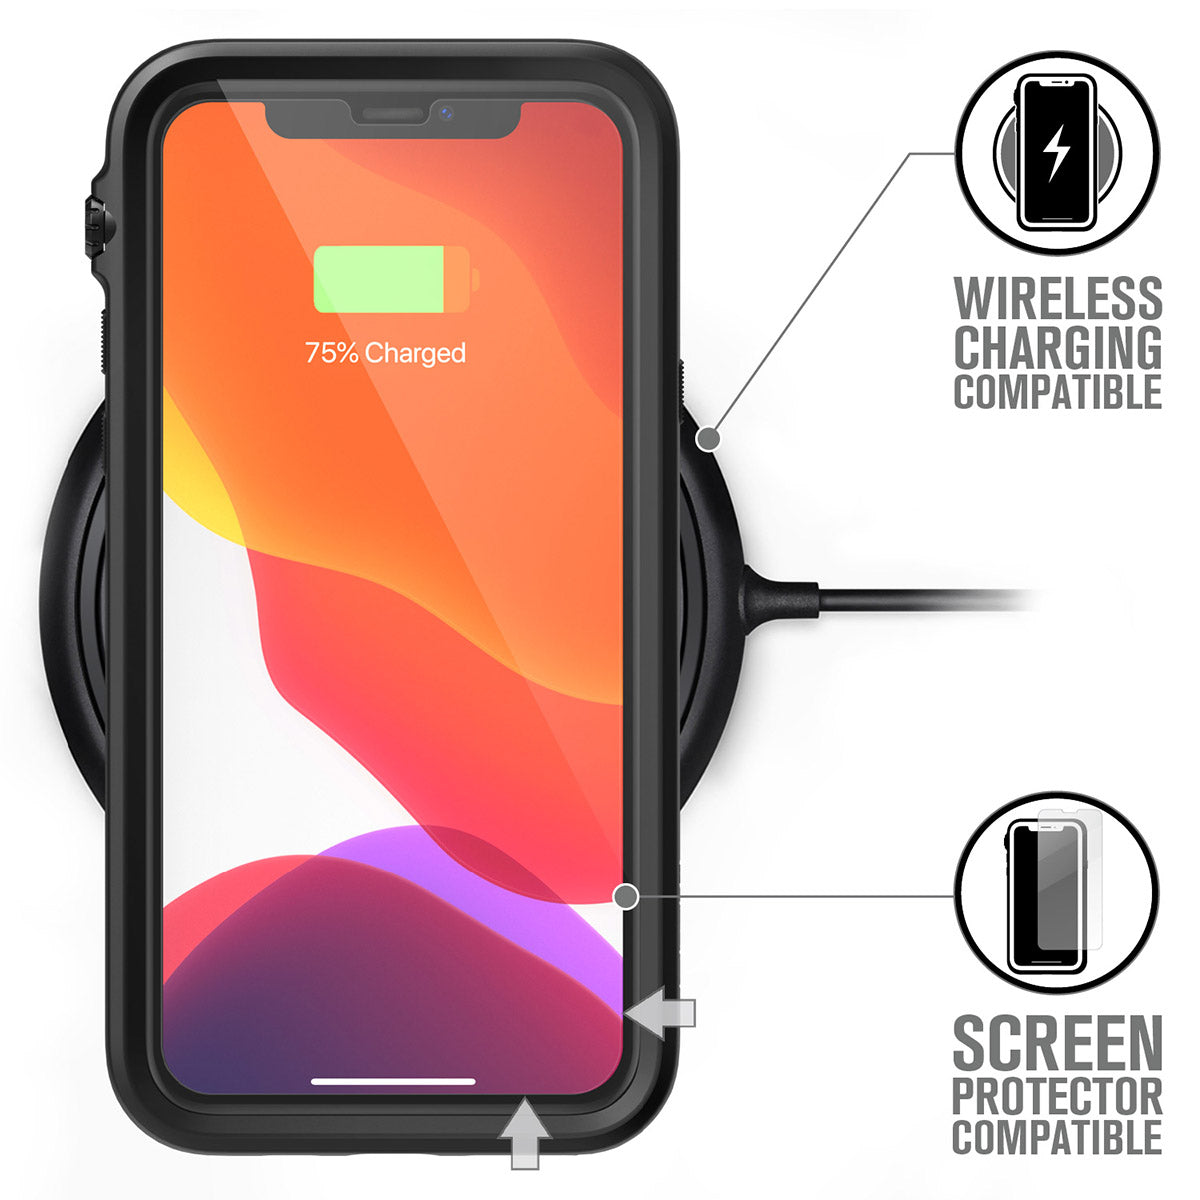 catalyst iPhone 11 series impact protection case for iphone 11 pro black placed on the wireless charger 75% charged text reads wireless charging compatible screen protector compatible